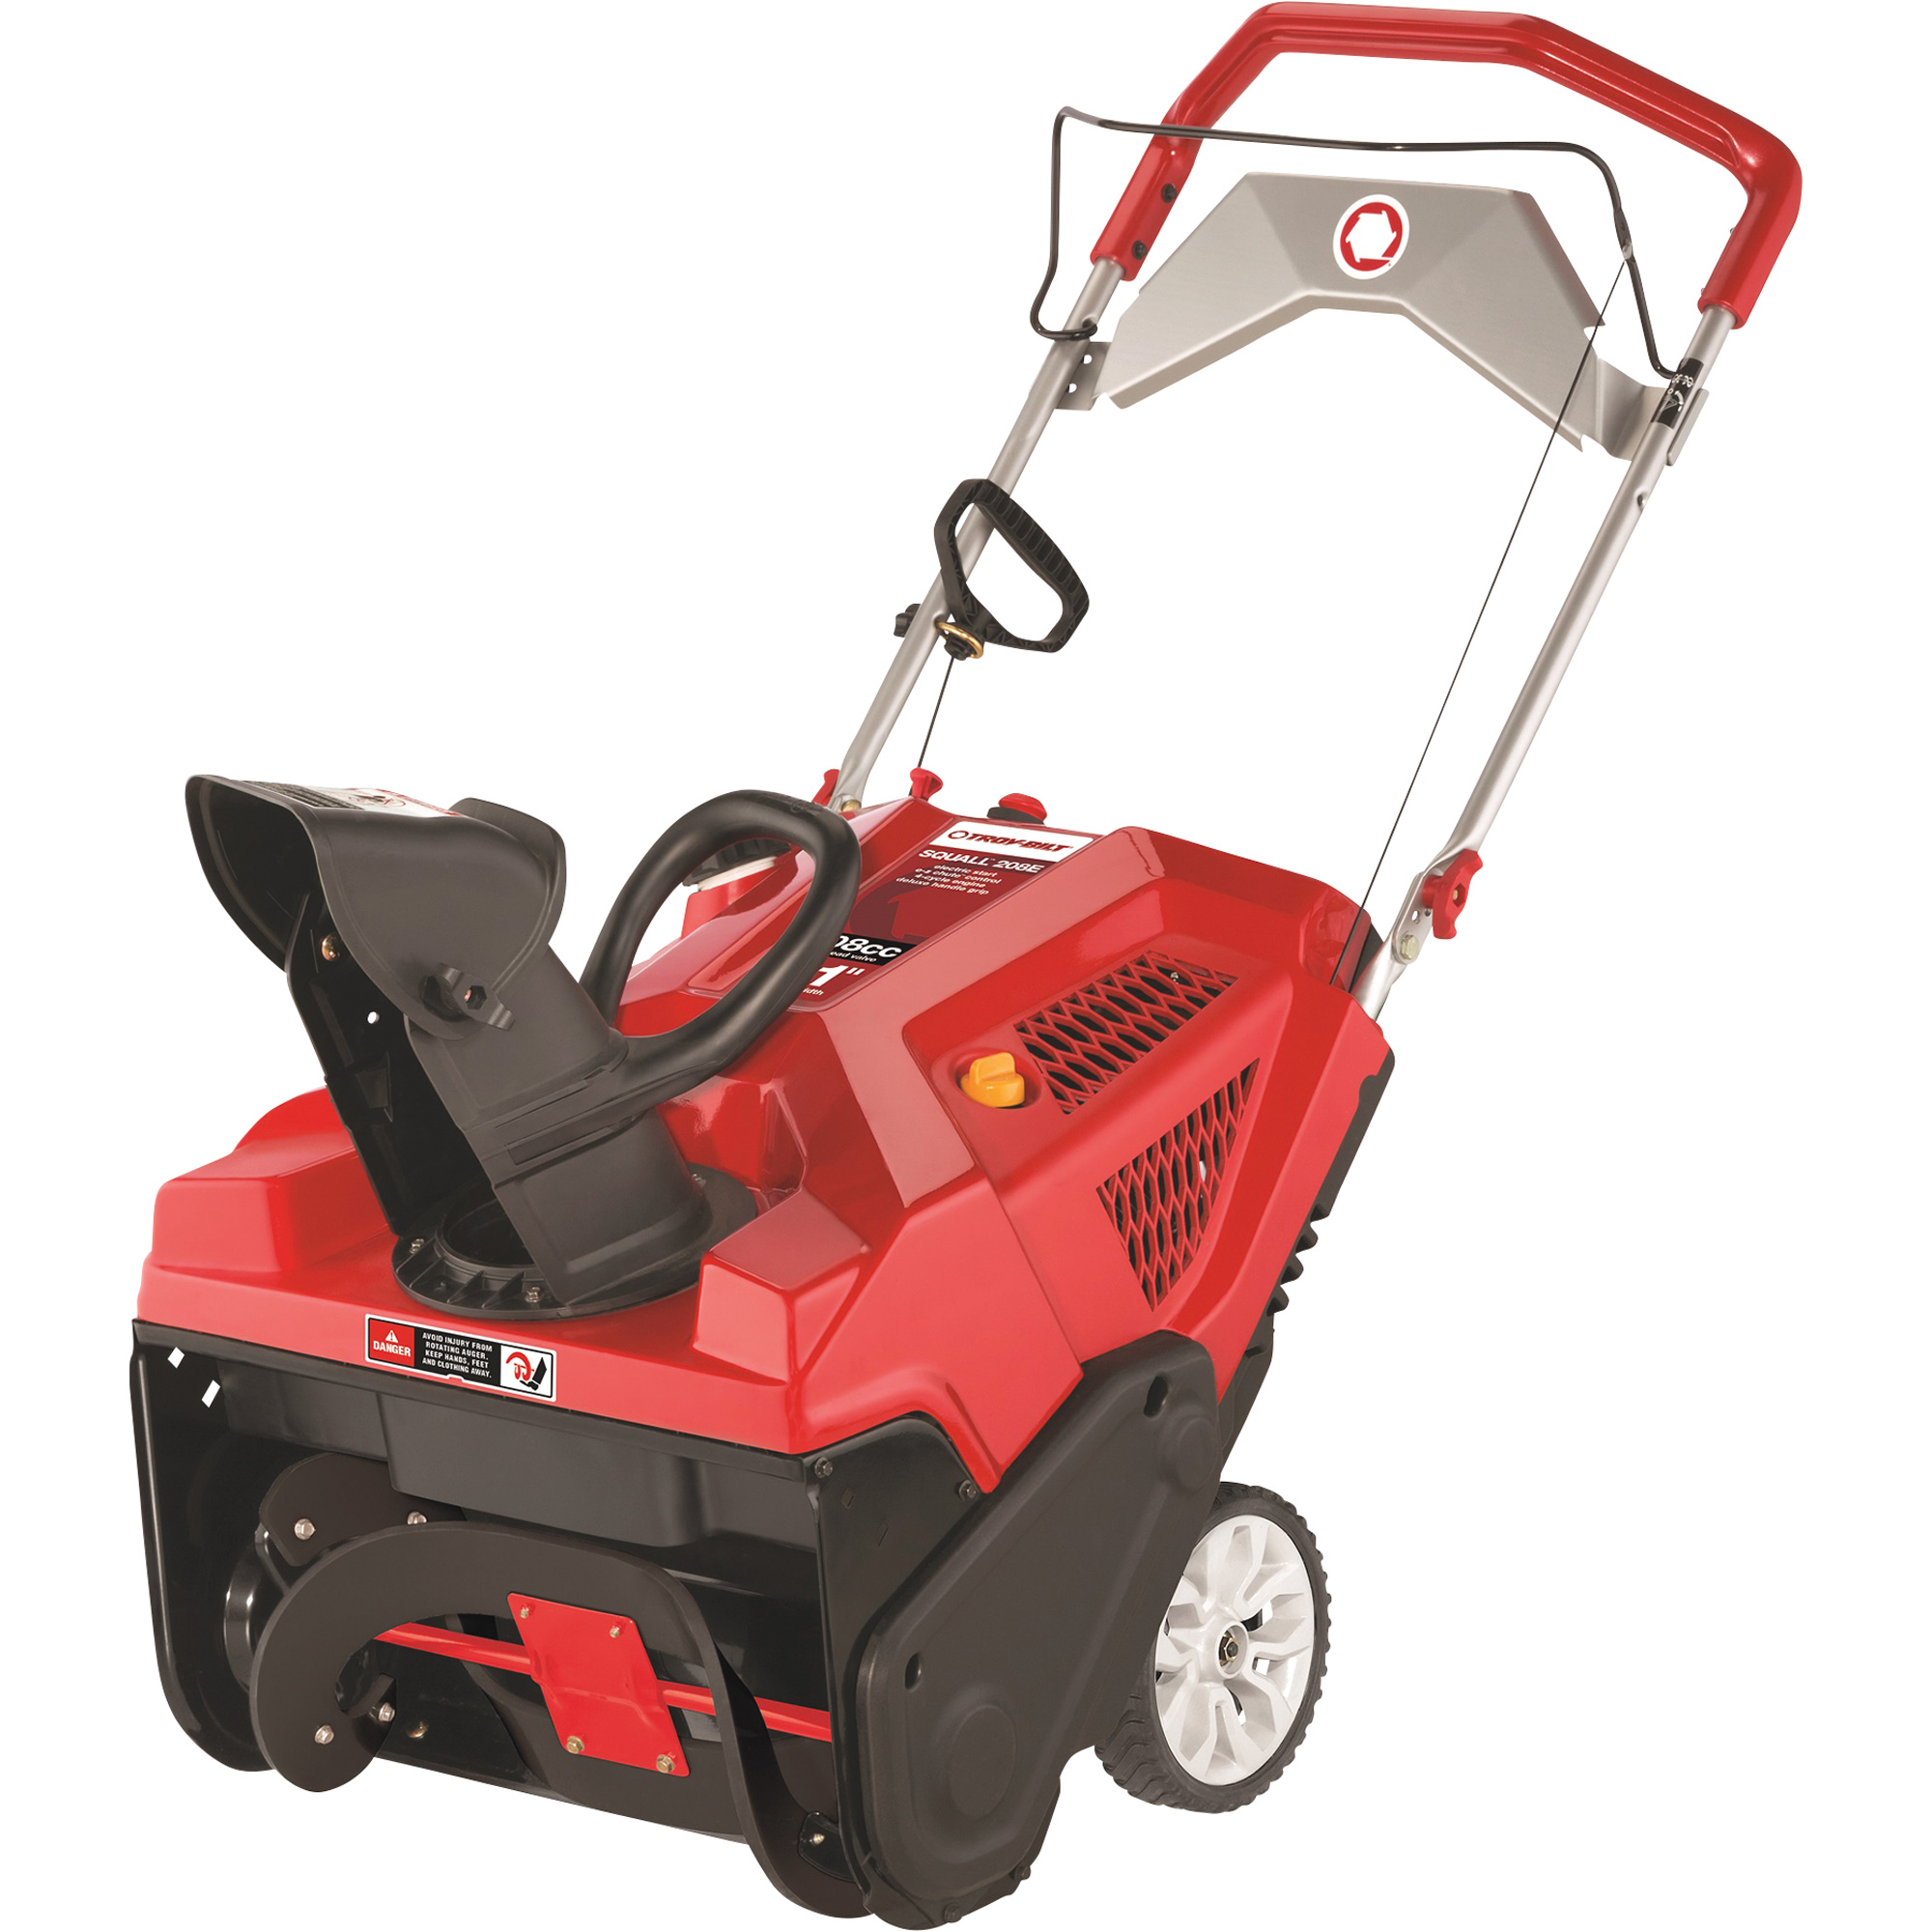 Troy-Bilt Squall 208E Single-Stage Electric-Start Snow Blower — 21Inch, 208cc Engine, Model 31AS2T7B766 -  31AS2T7G766